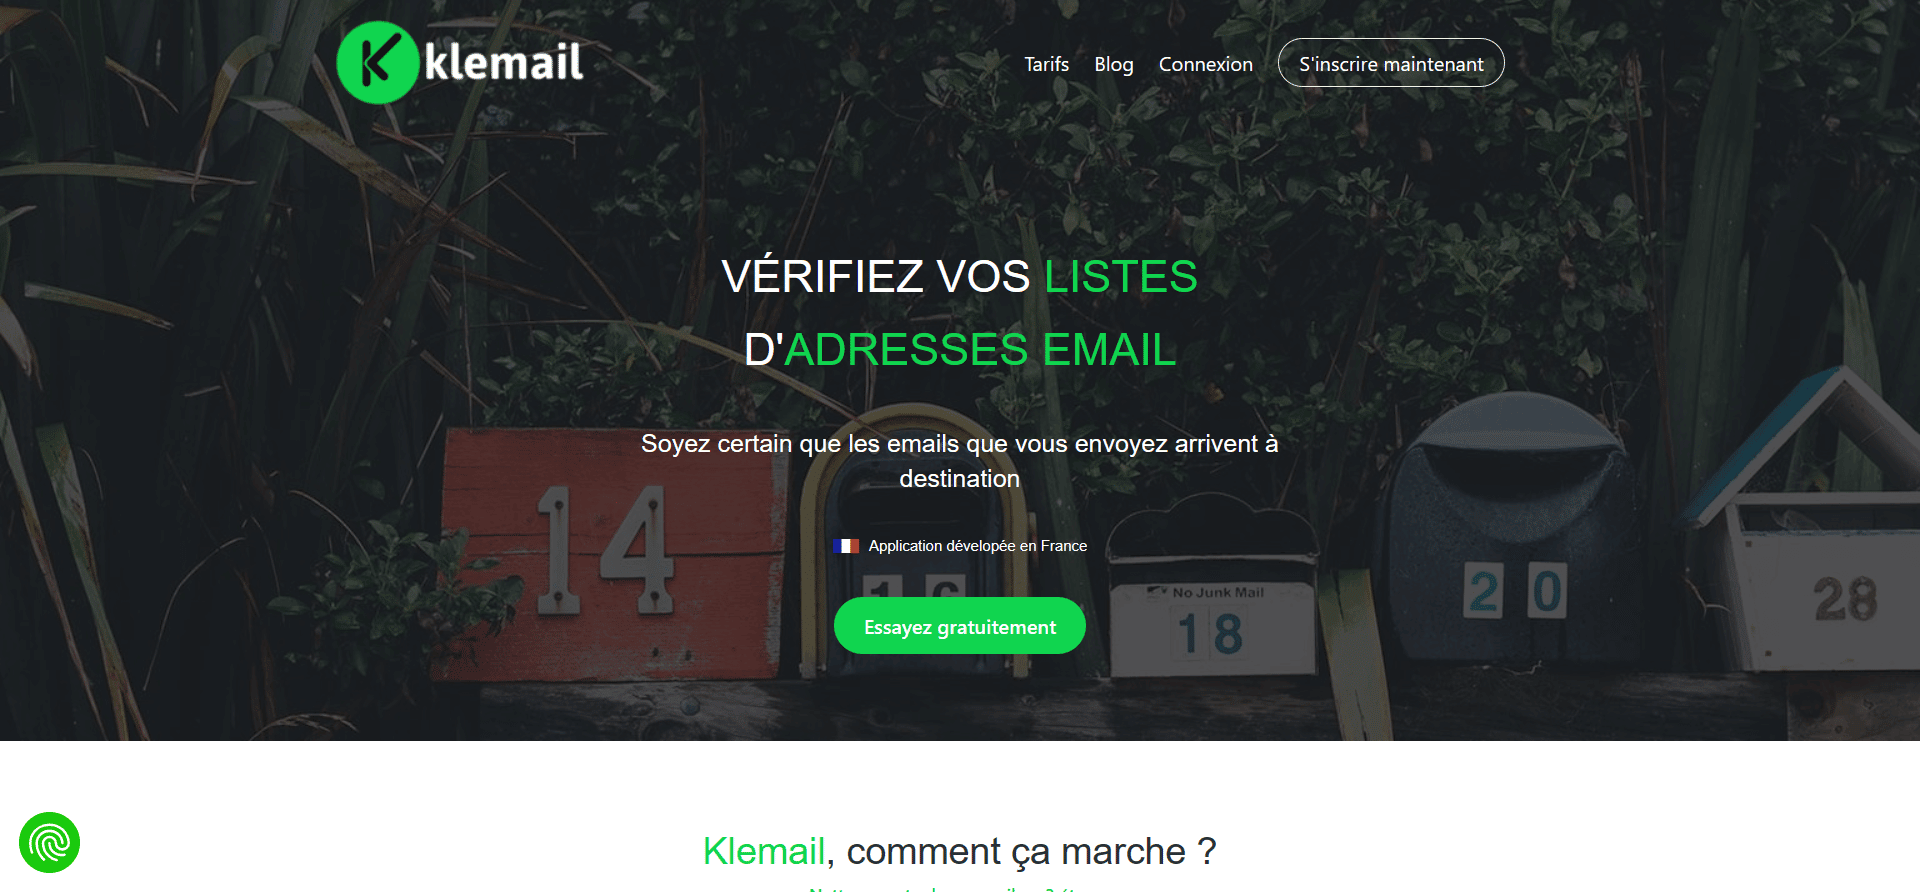 klemail nettoyage liste email